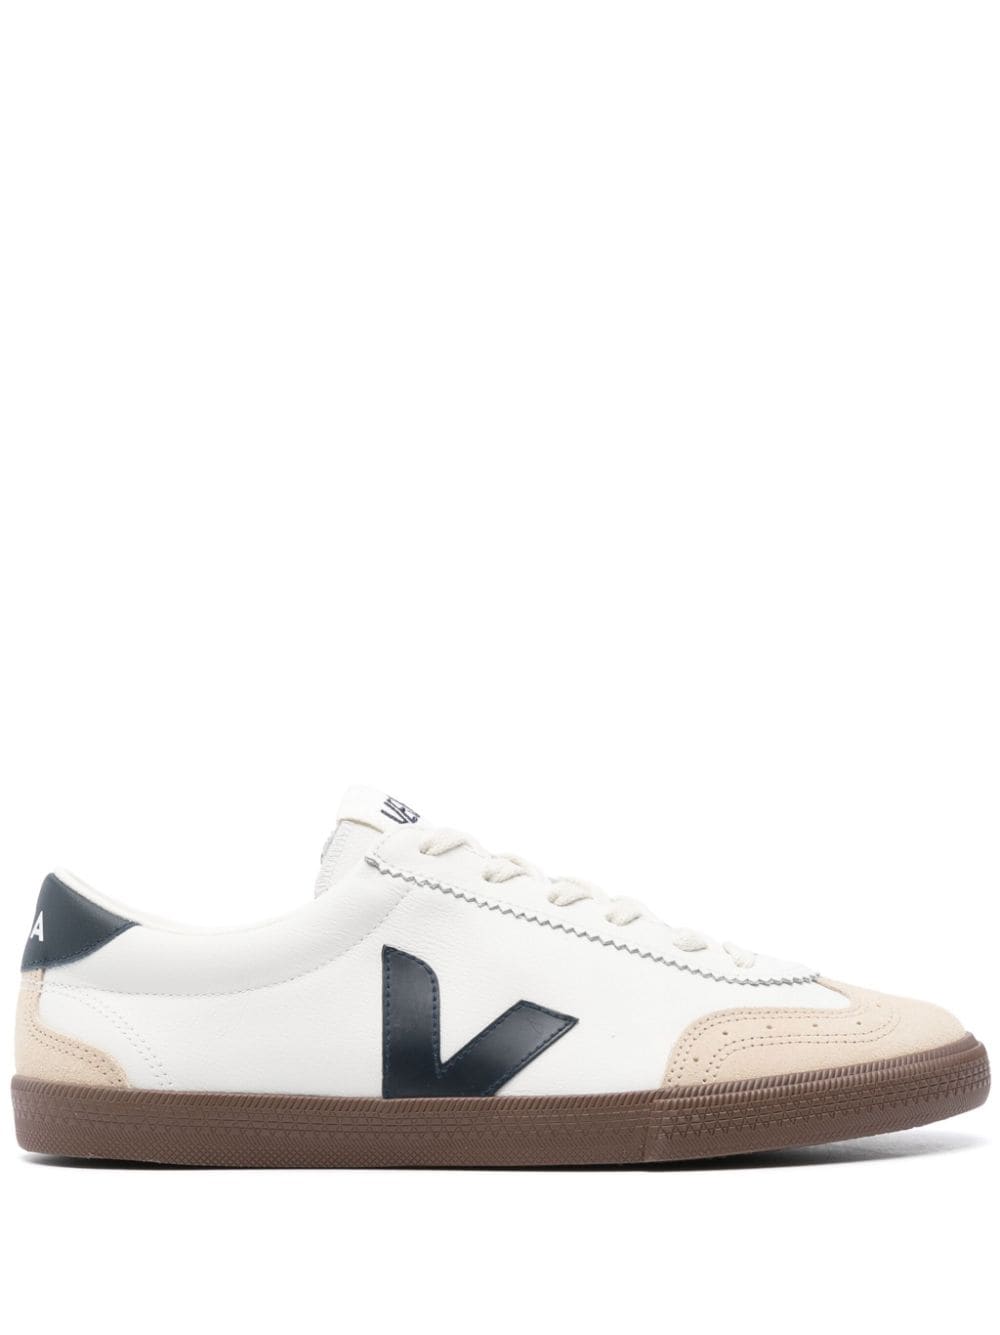 VEJA Volley O.T. leather sneakers - White von VEJA